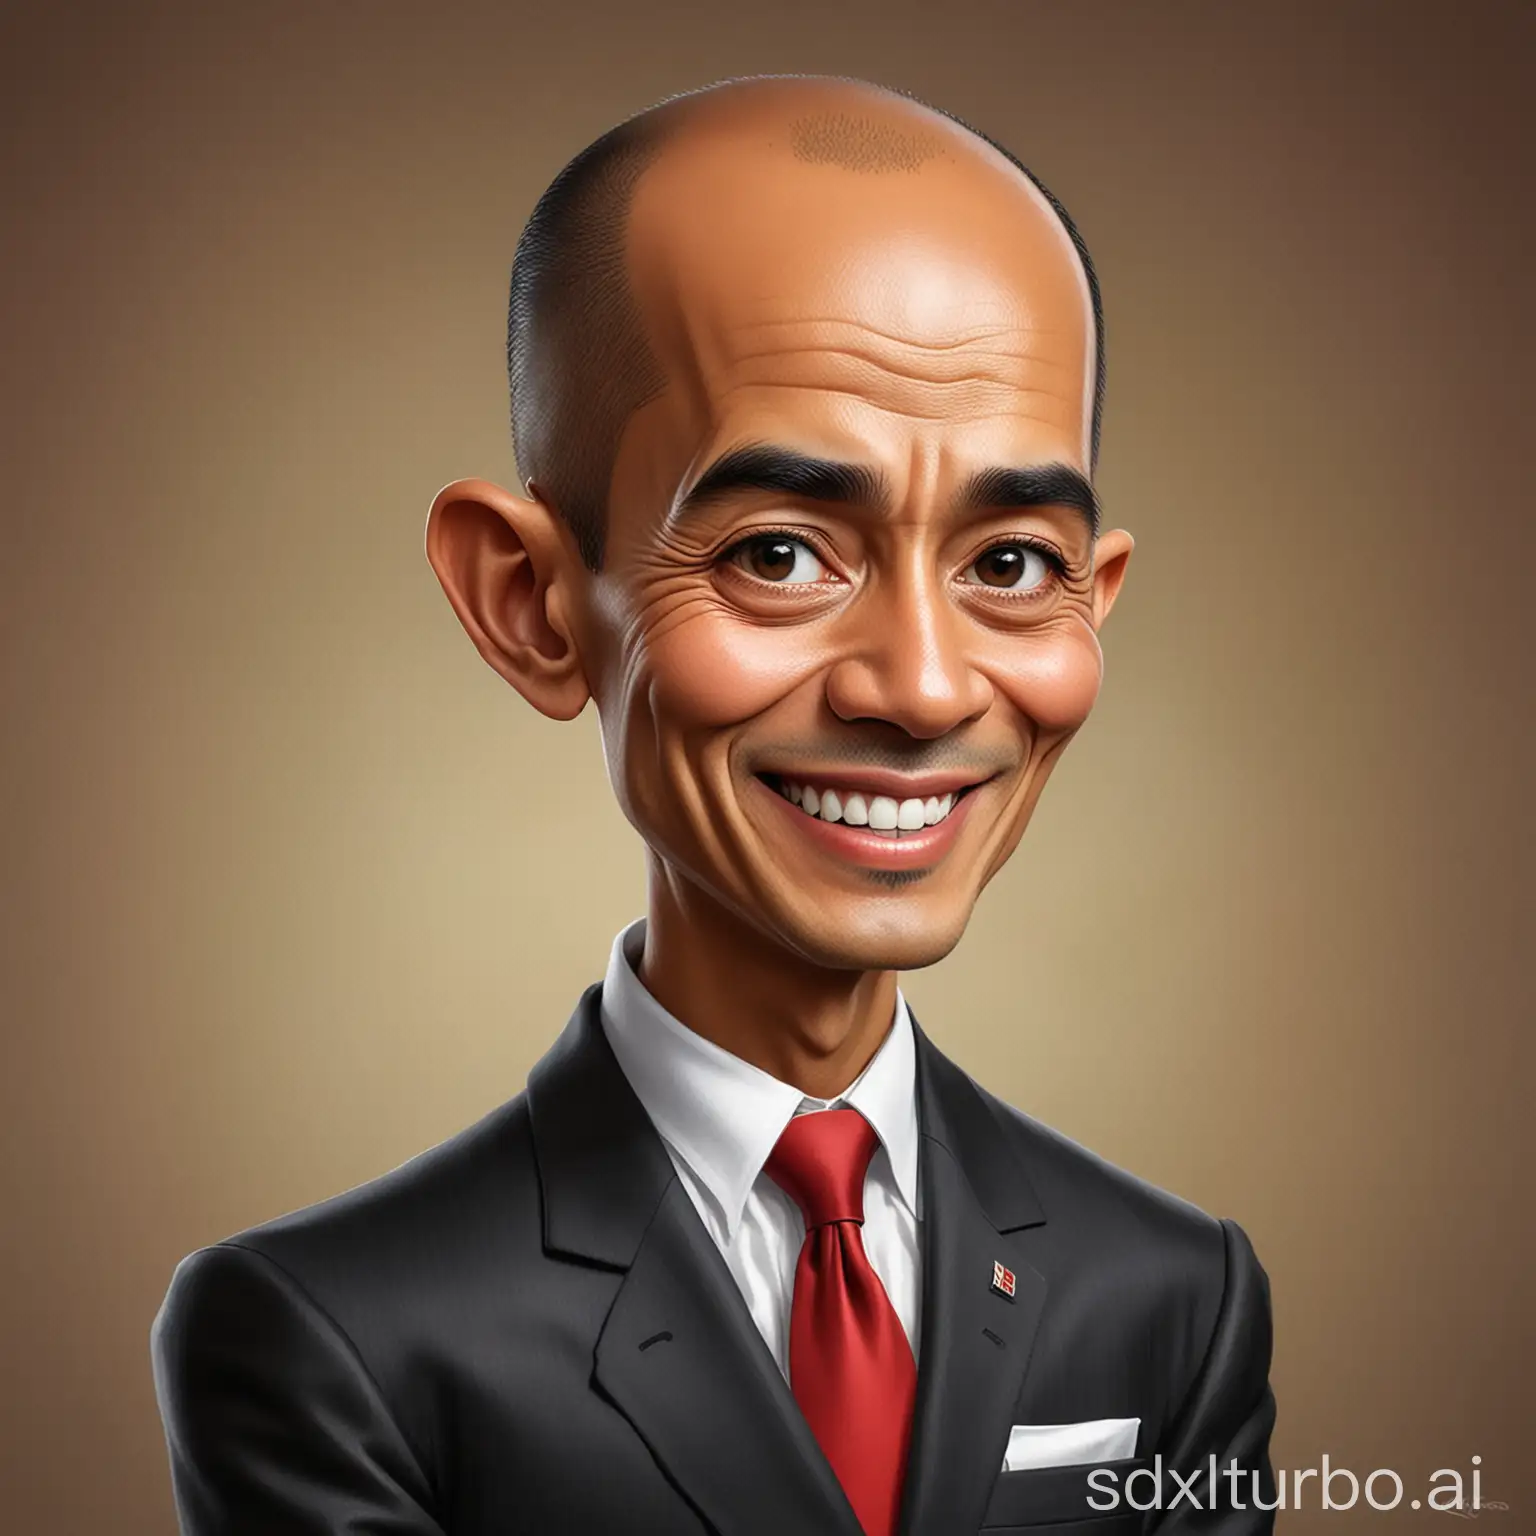 Caricature of Lulu's masterpiece Jokowidodo with a shaved head wearing a non-formal suit.